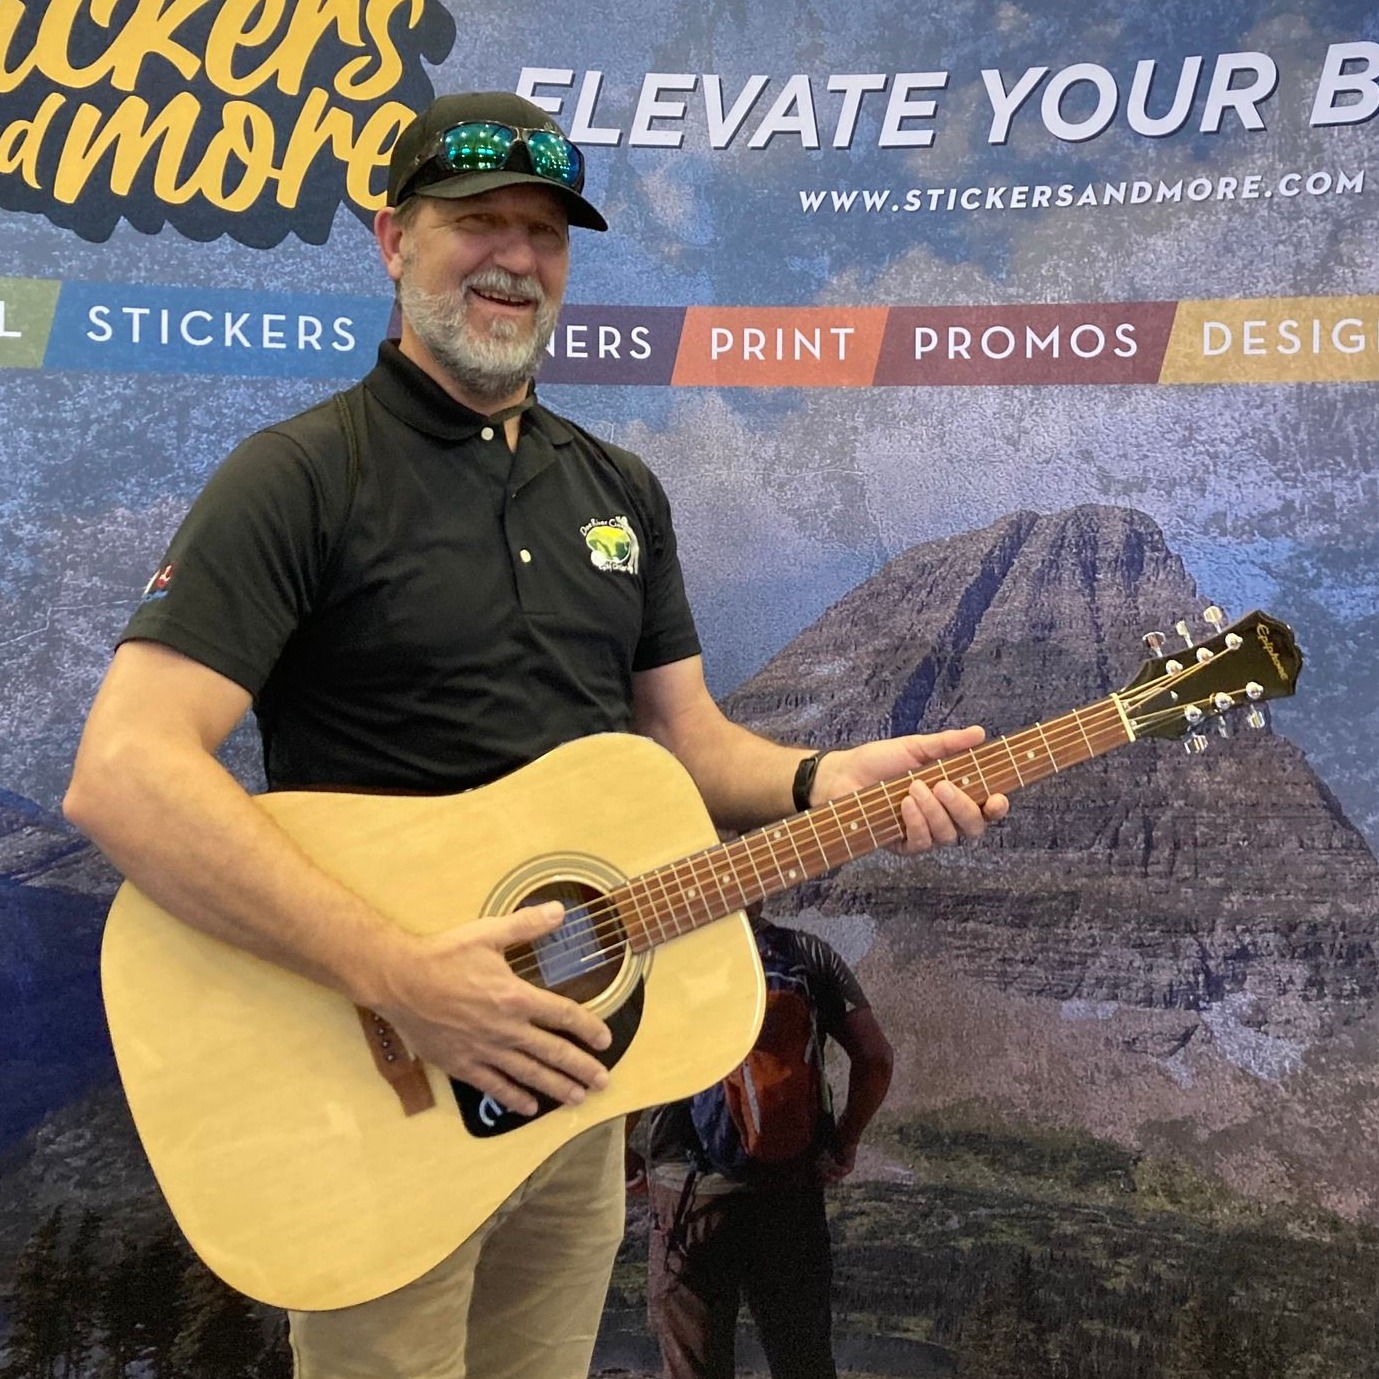 Congrats to Ryan from Doe River Gorge Ministries, Inc. on winning the guitar at the Christian Camp and Conference Association  North Carolina Conference. We love seeing happy faces at out booths. Looking to elevate your brand? Check out our website to see how we can help.
https://stickersandmore.com/camp/
#CCCA #camplife #churchlife #churchcamp #guitar #winnerswin #happycustomers